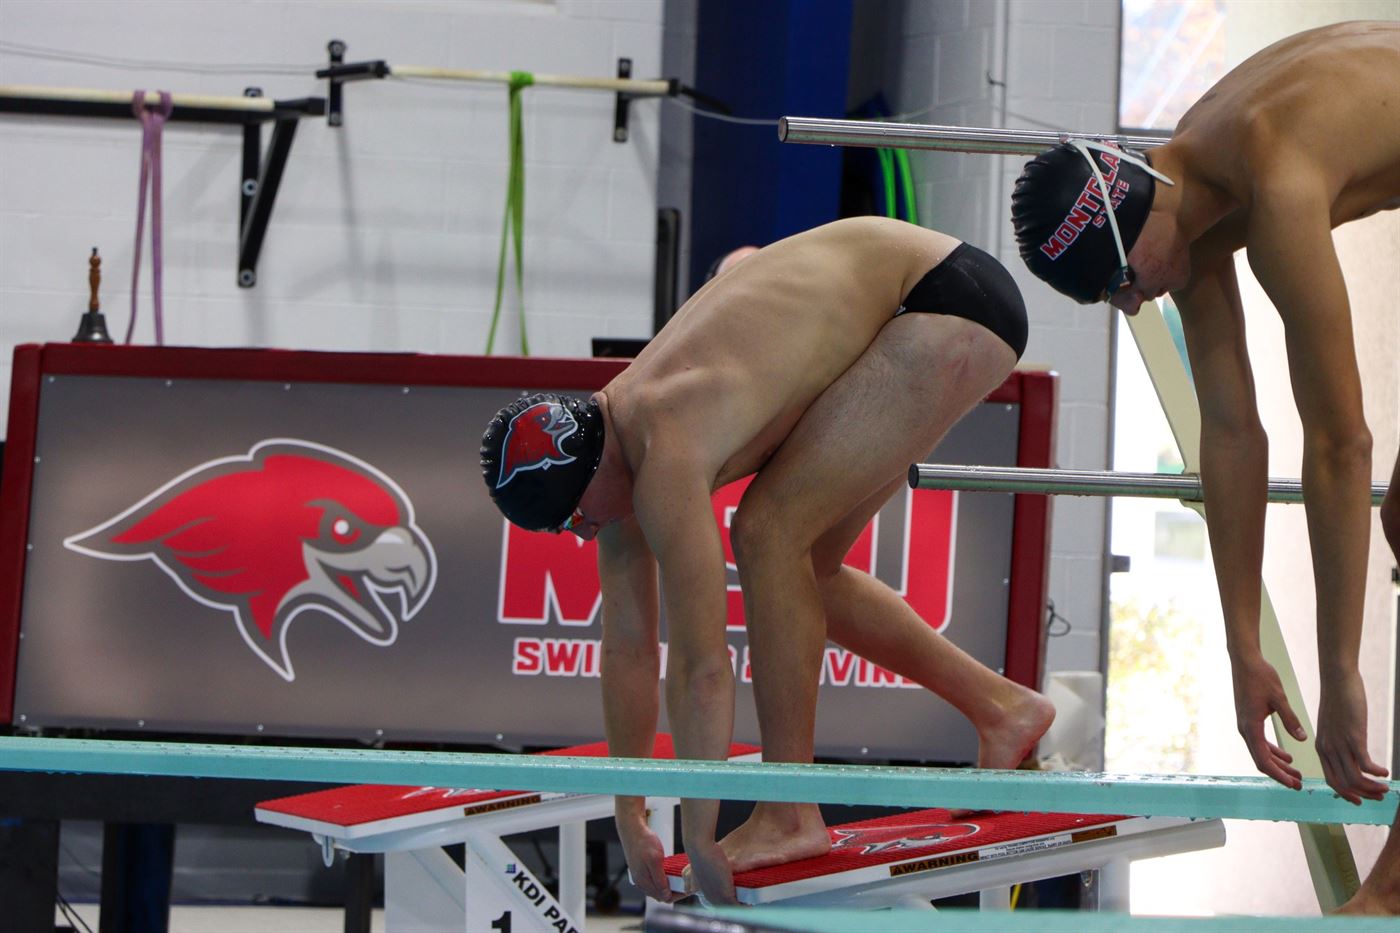 Sophomore Samuel Golovin on the block waiting for the start of the 50 free freestyle. Photo courtesy of Matthew Unczowsky